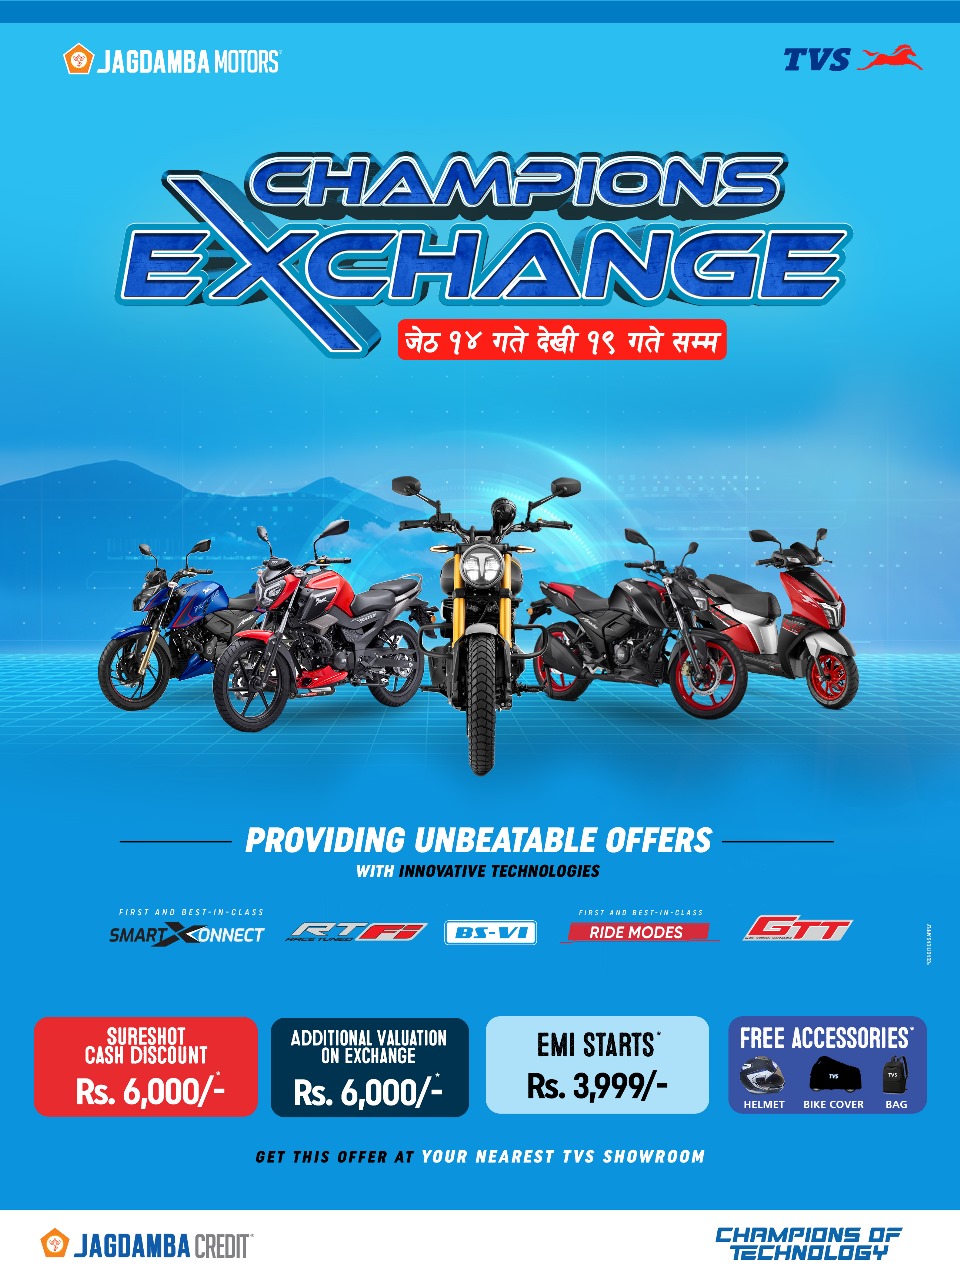 Jagdamba Motors Launches ‘Champions Exchange’ with Unbeatable Offers on TVS Motorcycles